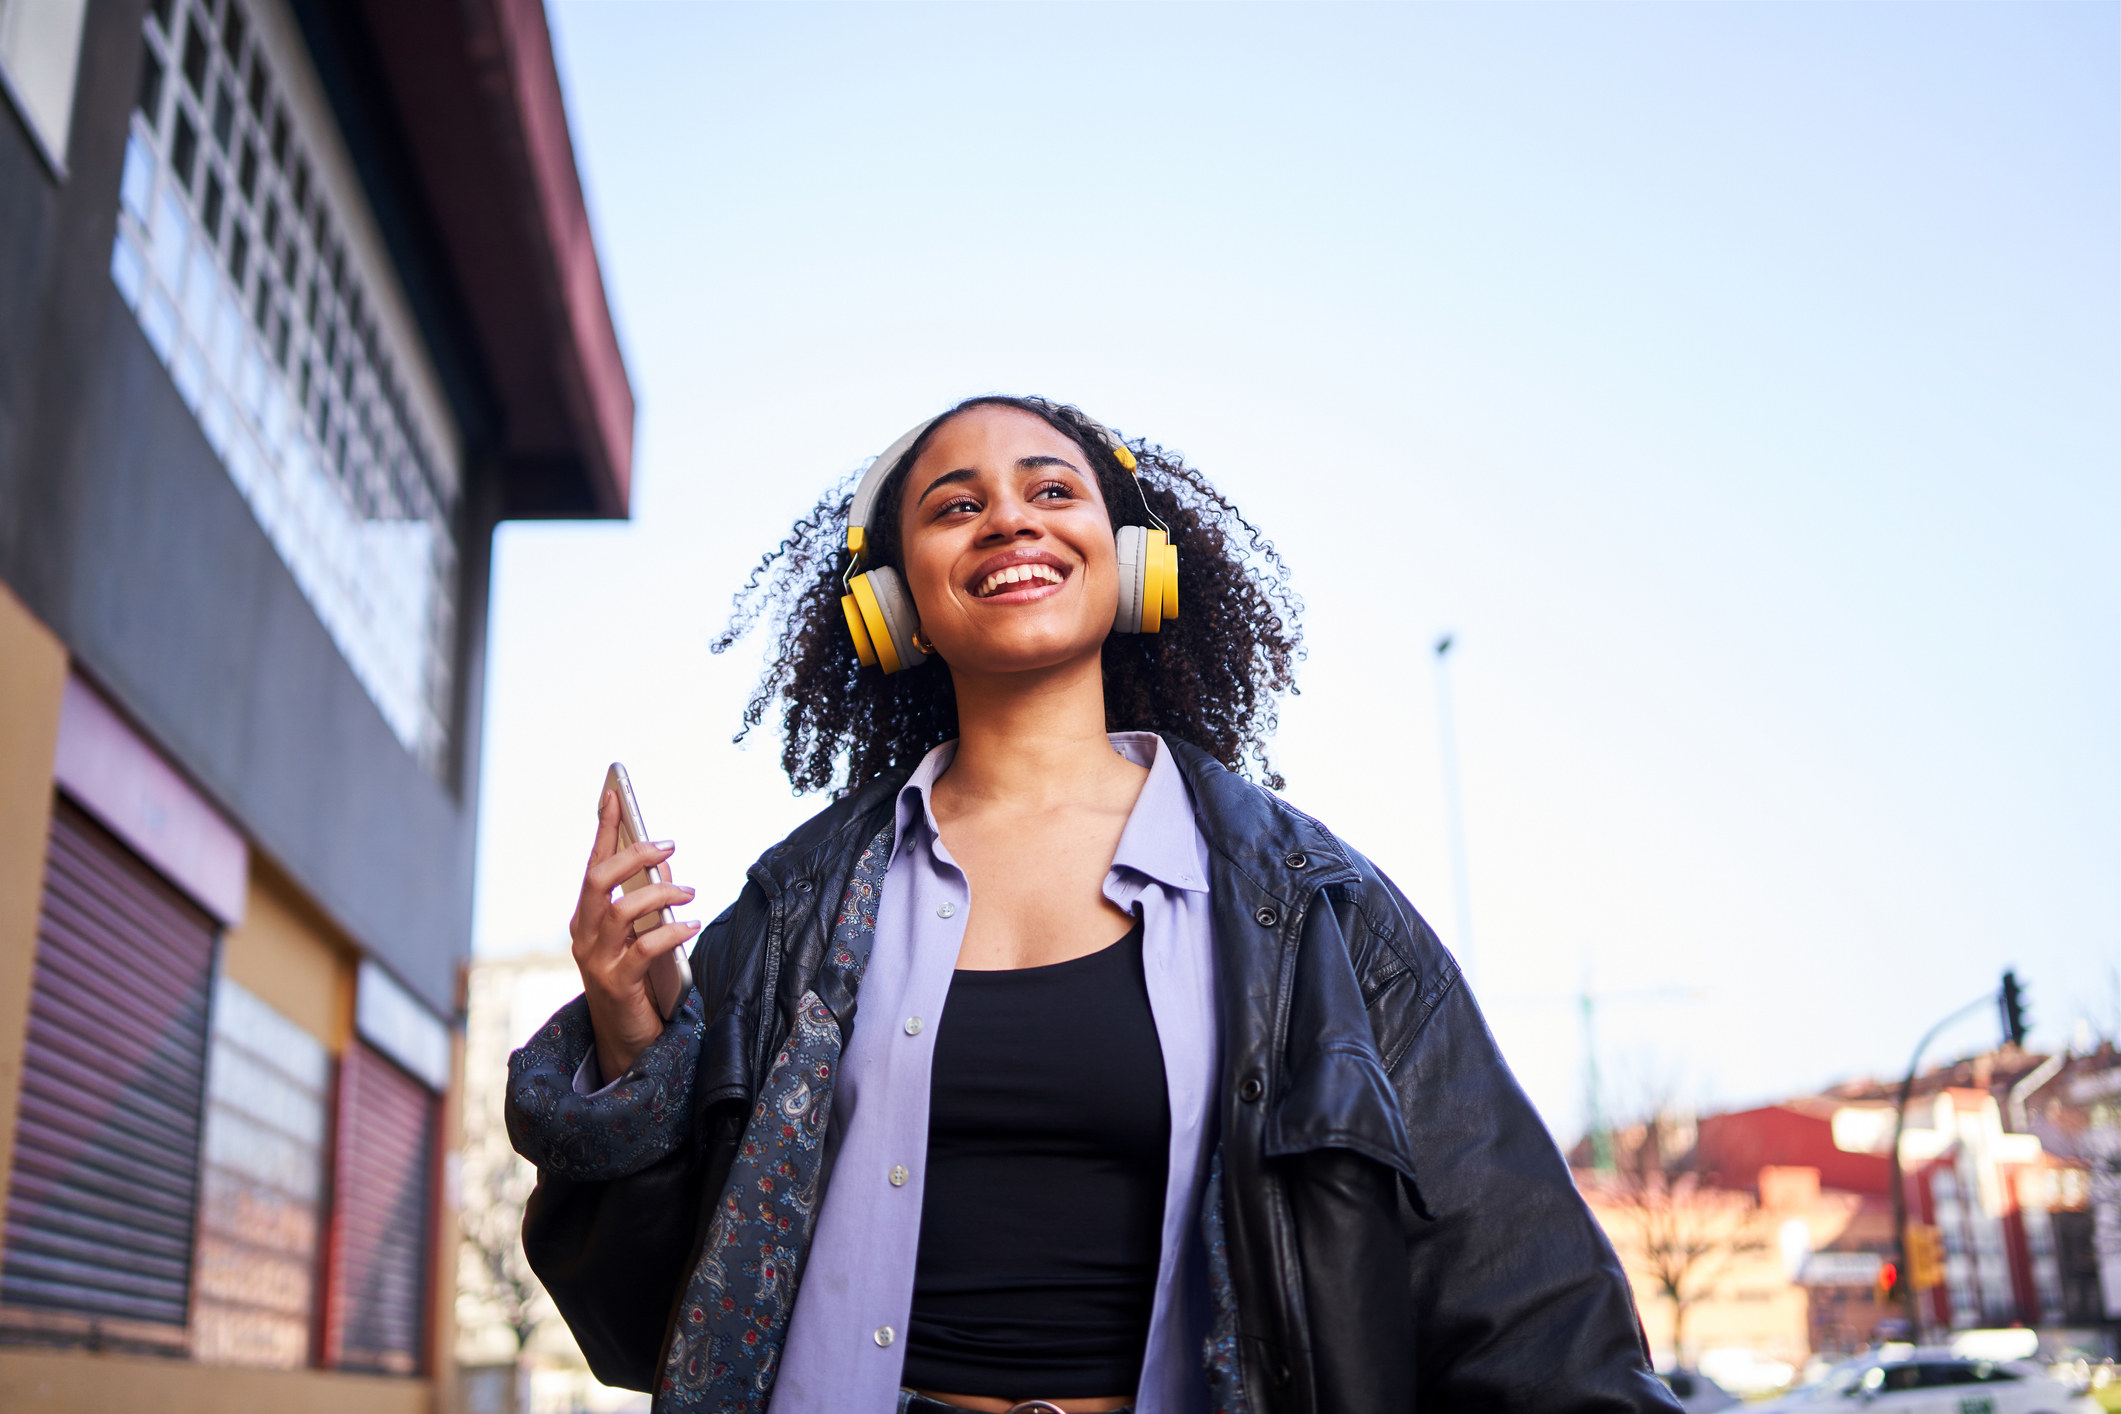 A woman listening to headphones while walking down the street